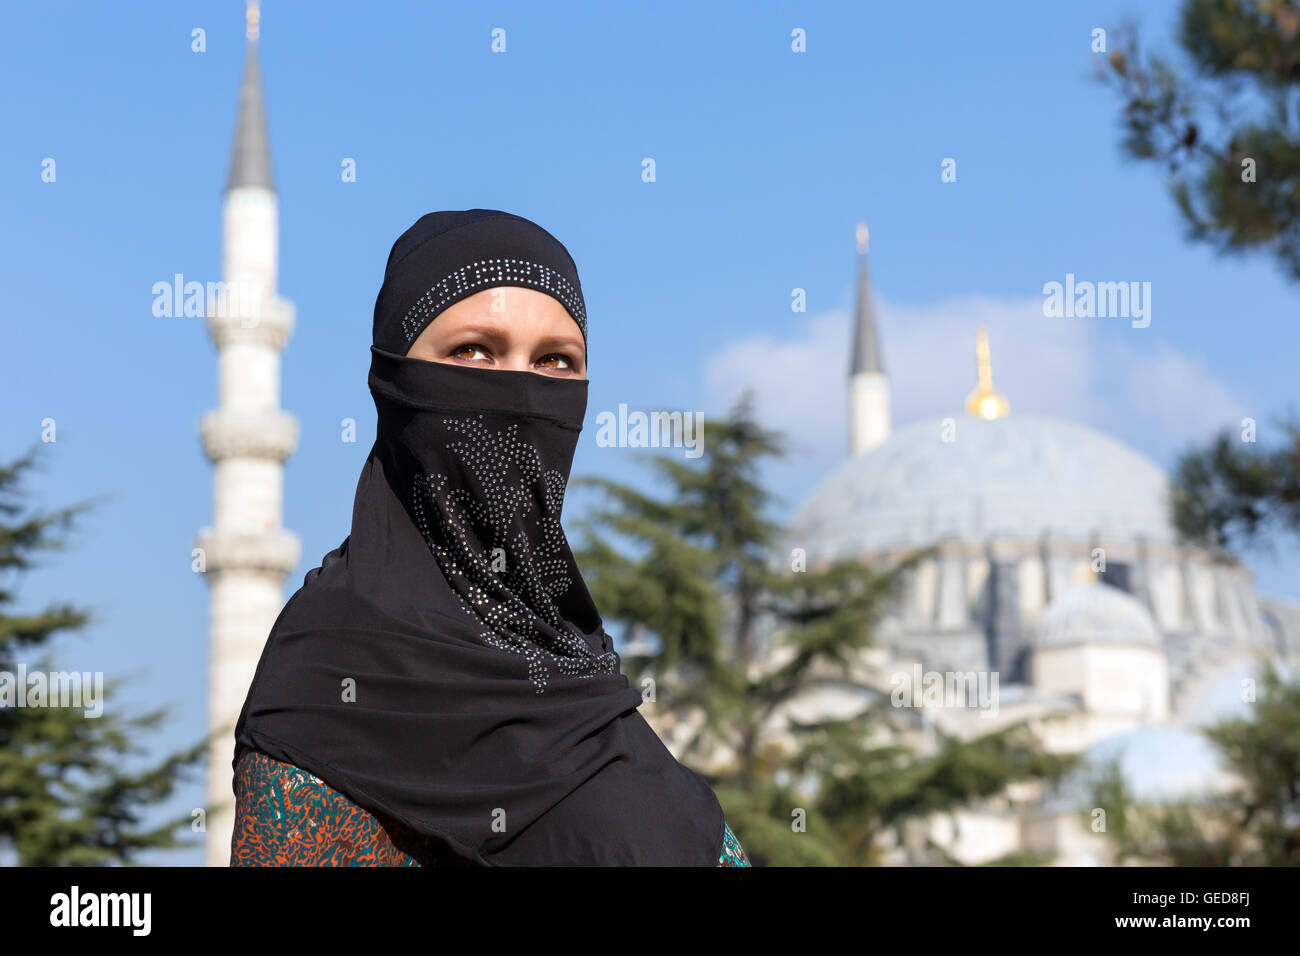 Portrait of beautiful Arabian Woman in traditional Muslim Clothing Middle East Urban landscape with Mosque and Minarets on Backg Stock Photo